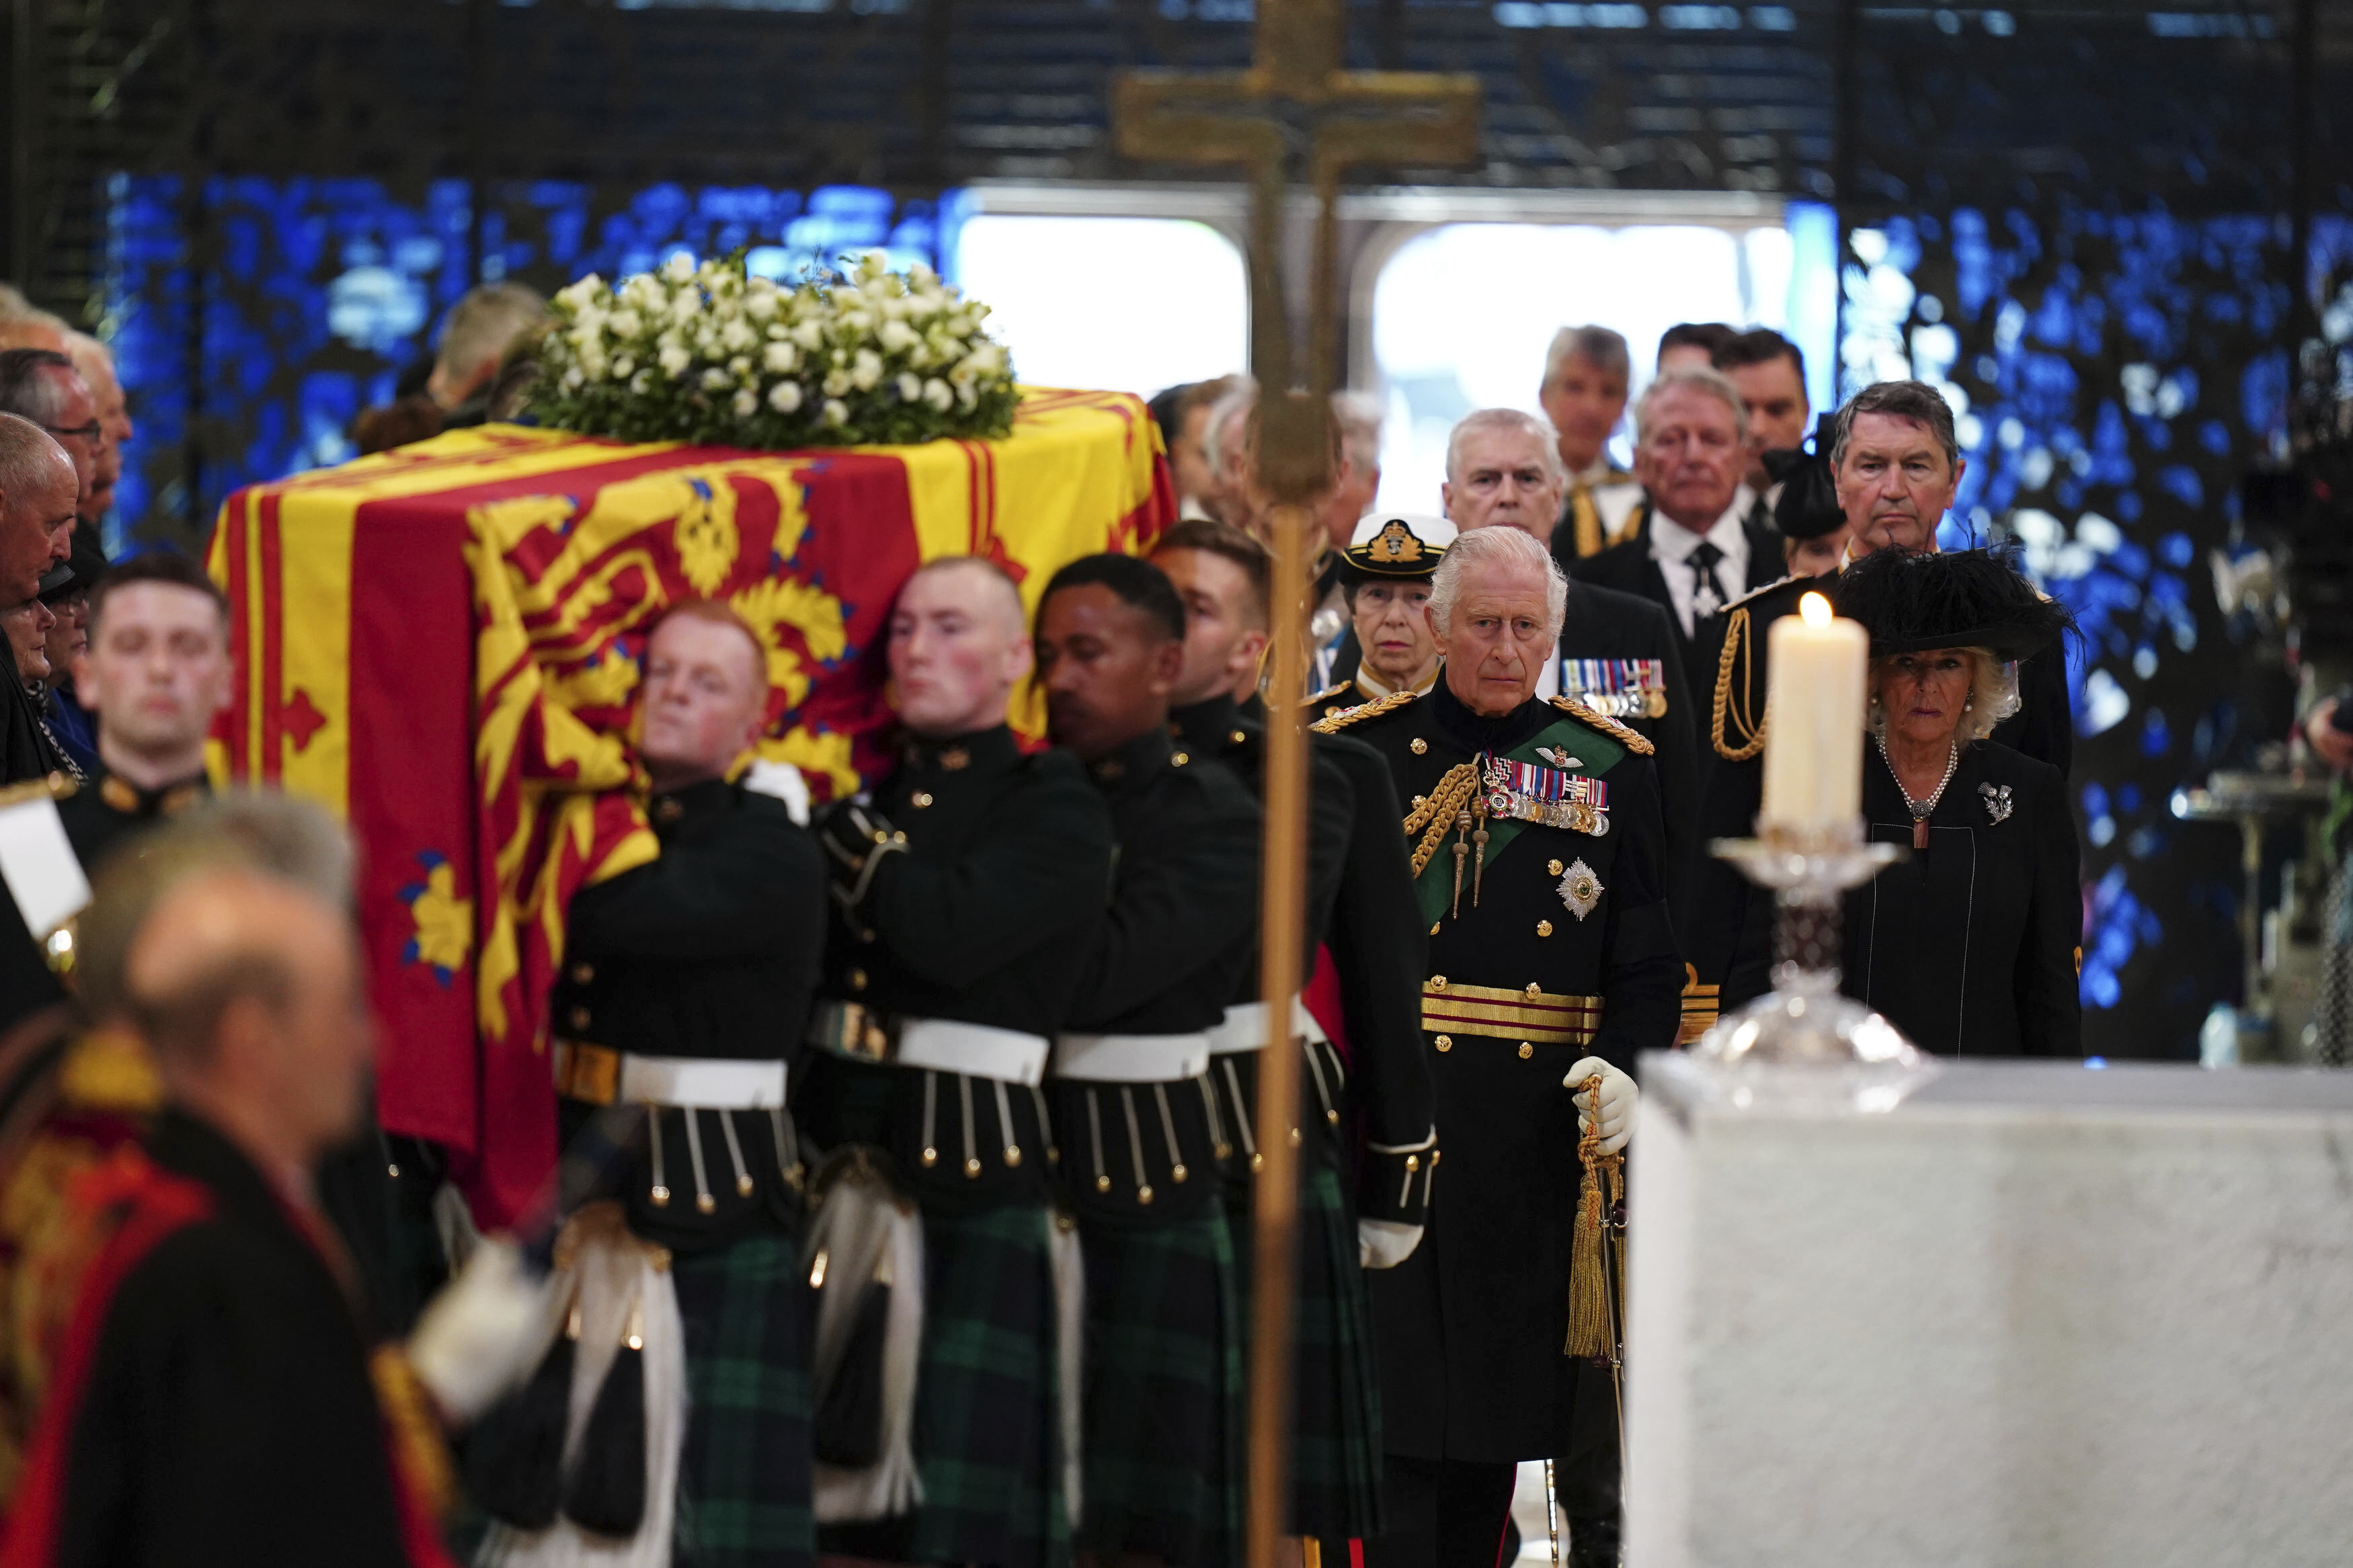 <p>Britain's King Charles III and wife Camilla, Queen Consort, Princess Anne and husband Sir Tim Laurence and Prince Andrew followed Queen Elizabeth II's coffin as it entered St. Giles' Cathedral in Edinburgh, Scotland, for a Service of Prayer and Reflection on Sept. 12, 2022, a week before Her Majesty's funeral was to be held in London.</p>